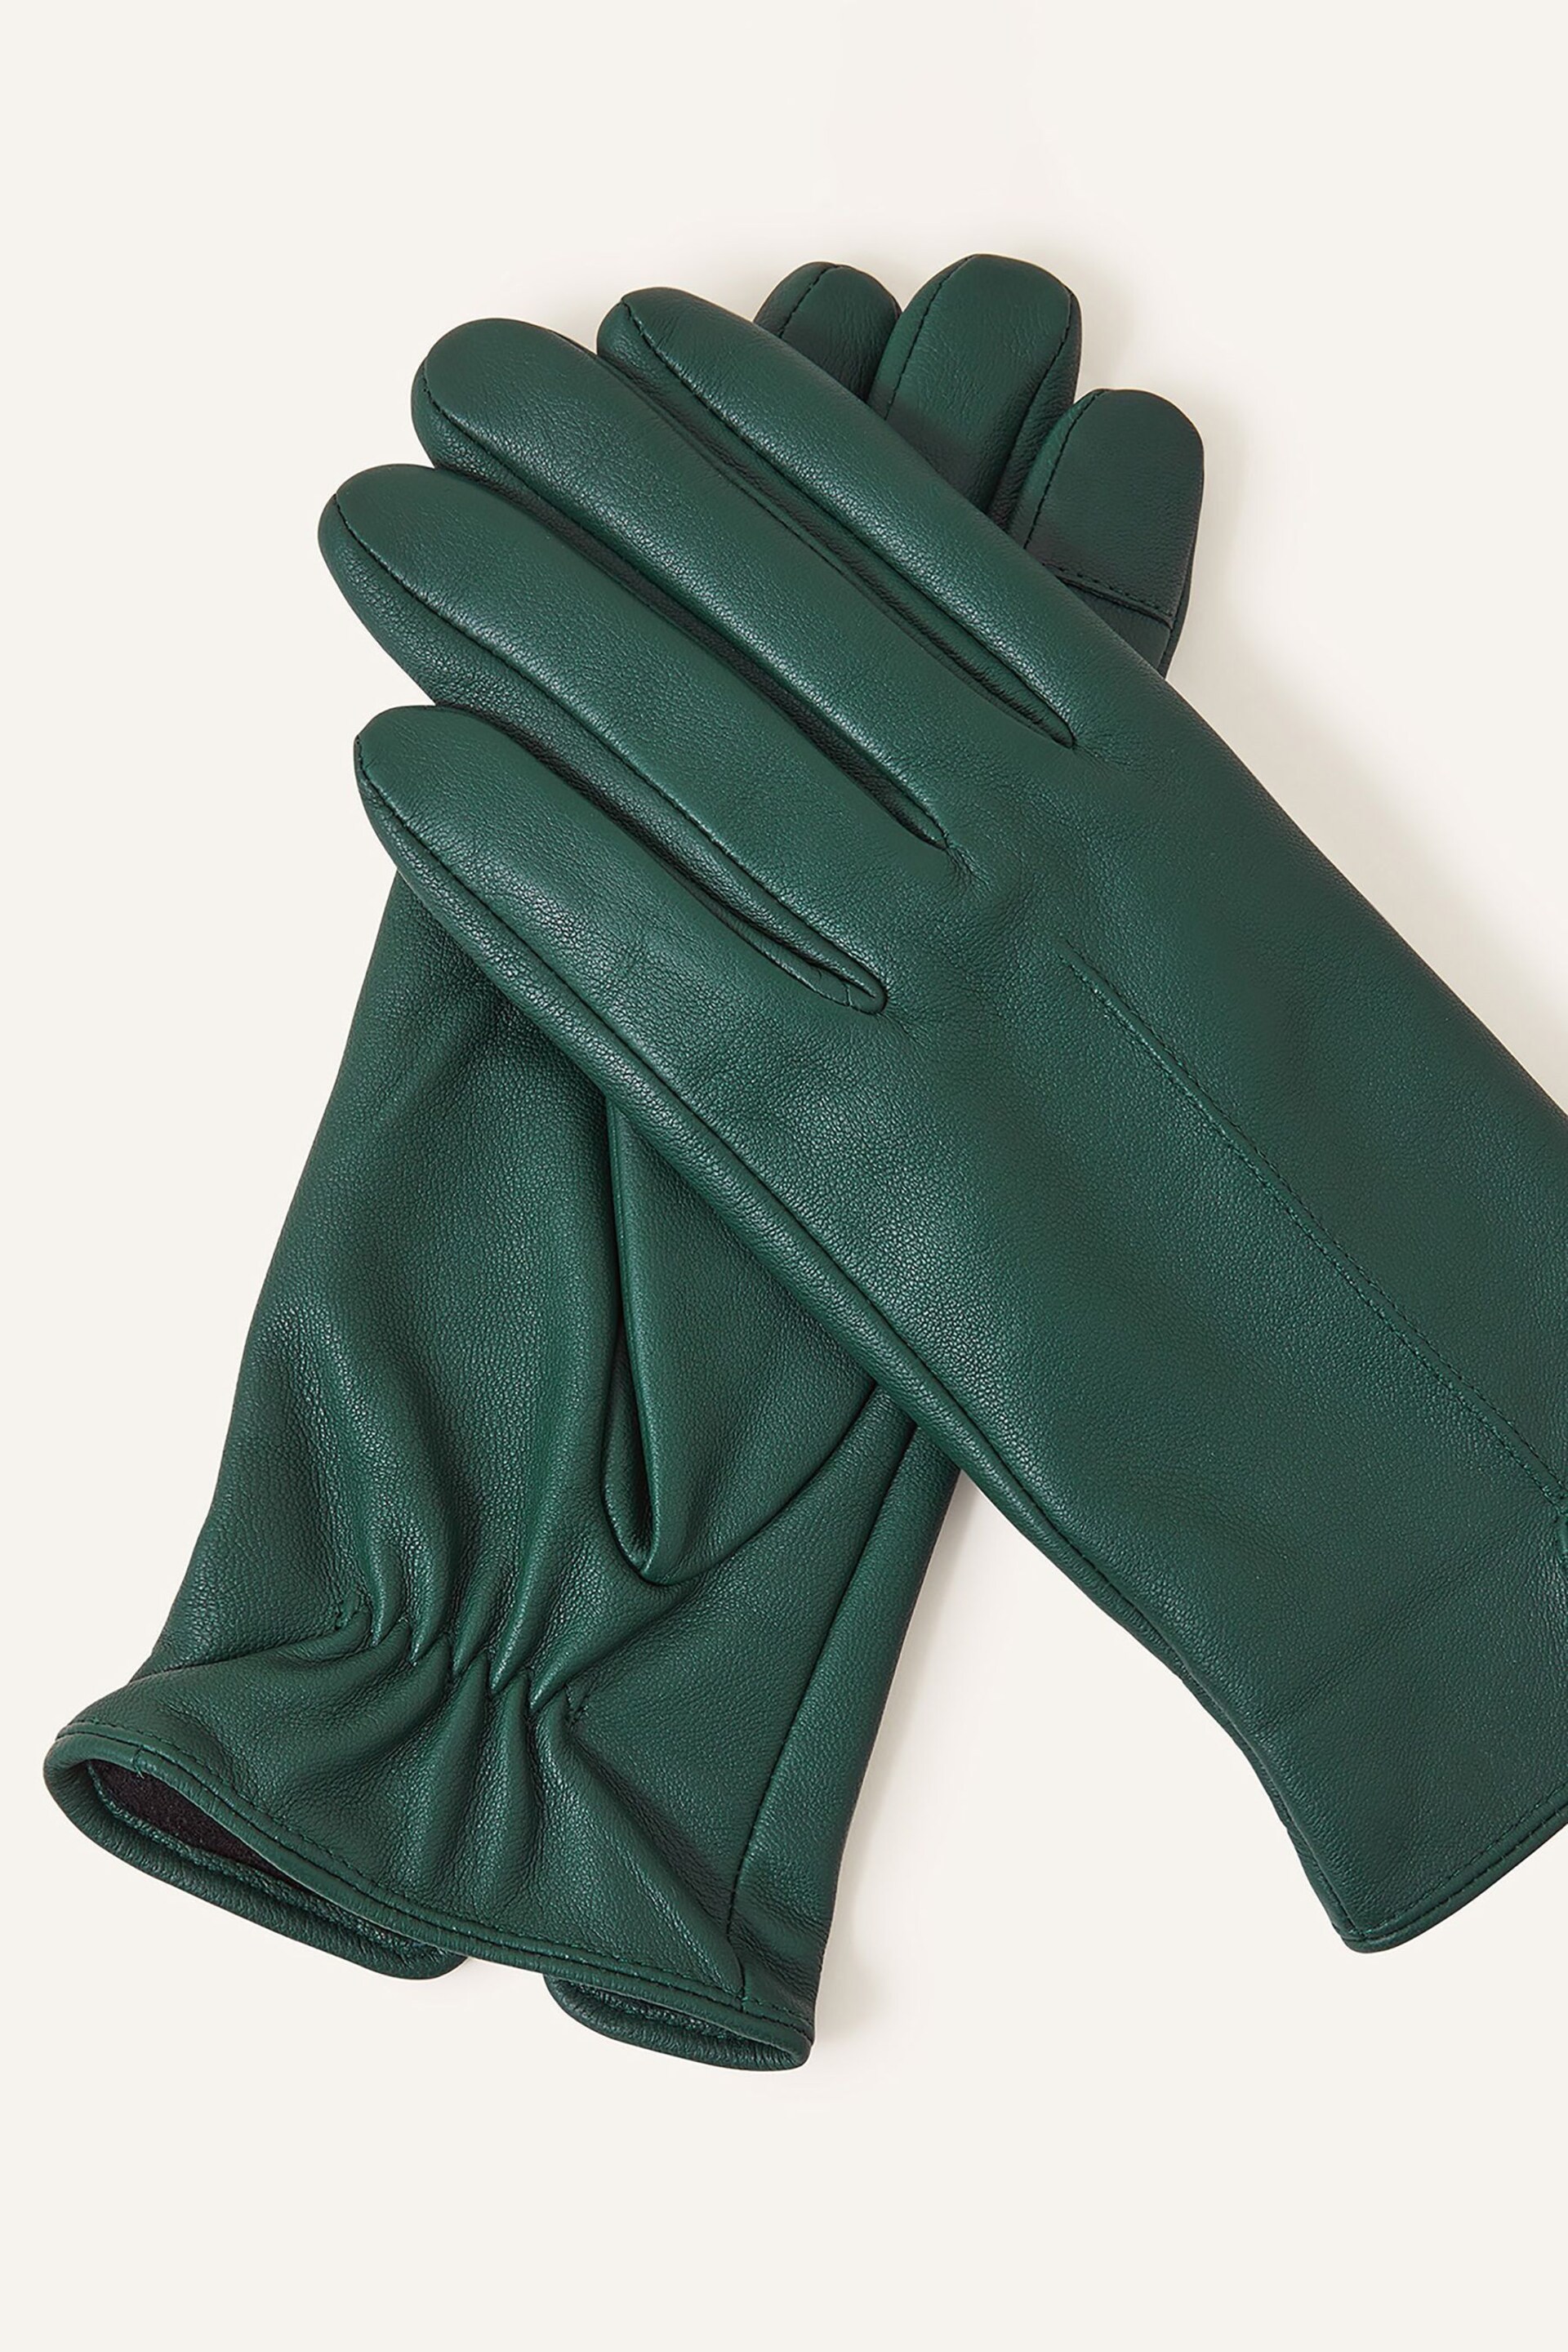 Accessorize Green Touch Screen Leather Gloves - Image 2 of 2